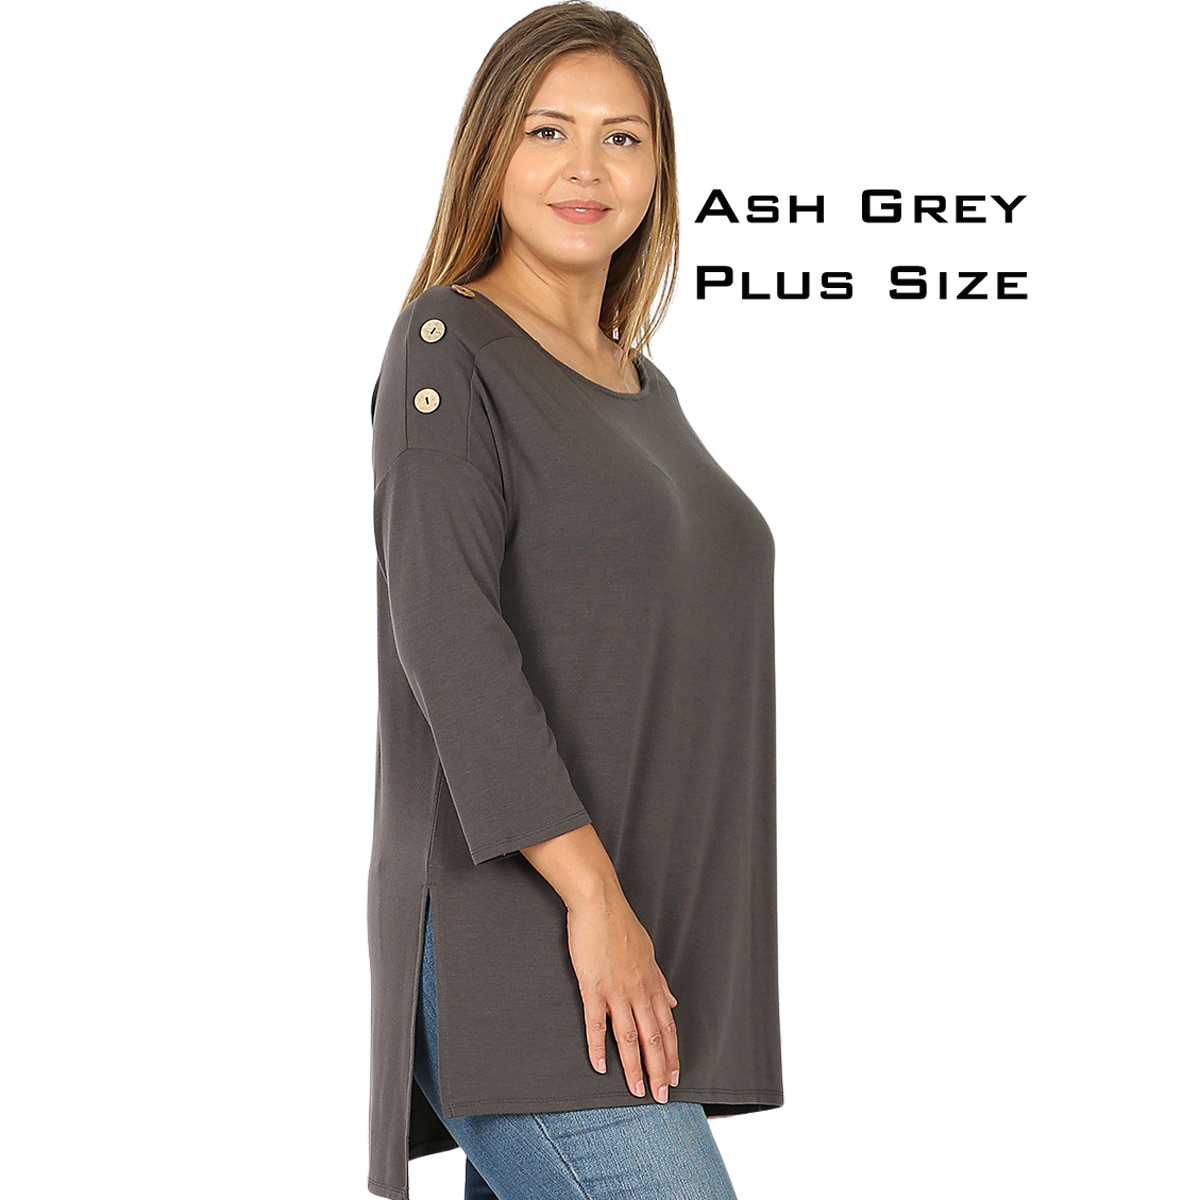 2082 - Boat Neck Hi-Lo Tops w/Wooden Buttons ASH GREY Boat Neck Hi-Lo Top w/ Wooden Buttons 2082 - 3X